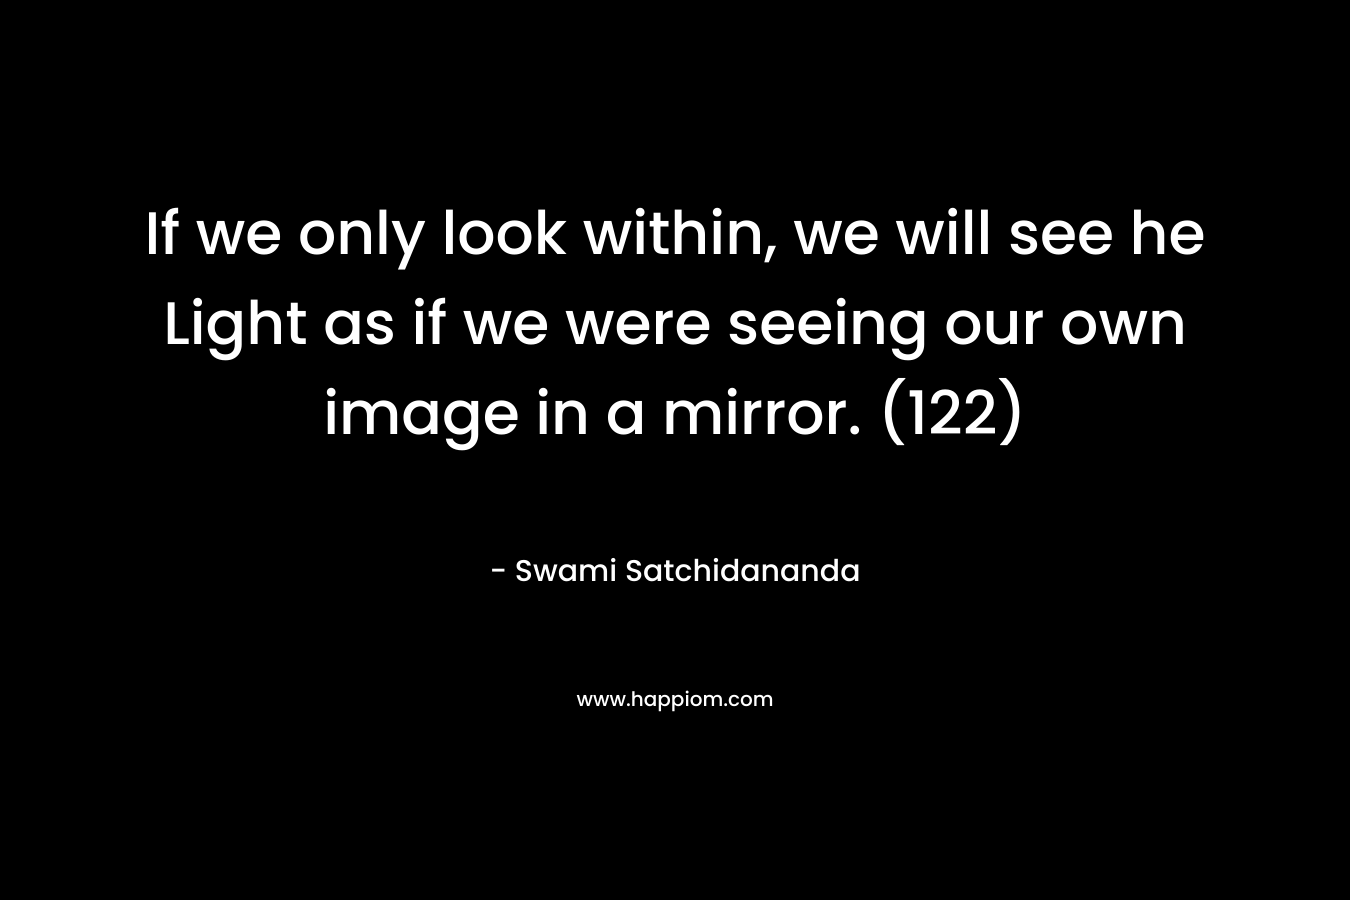 If we only look within, we will see he Light as if we were seeing our own image in a mirror. (122)